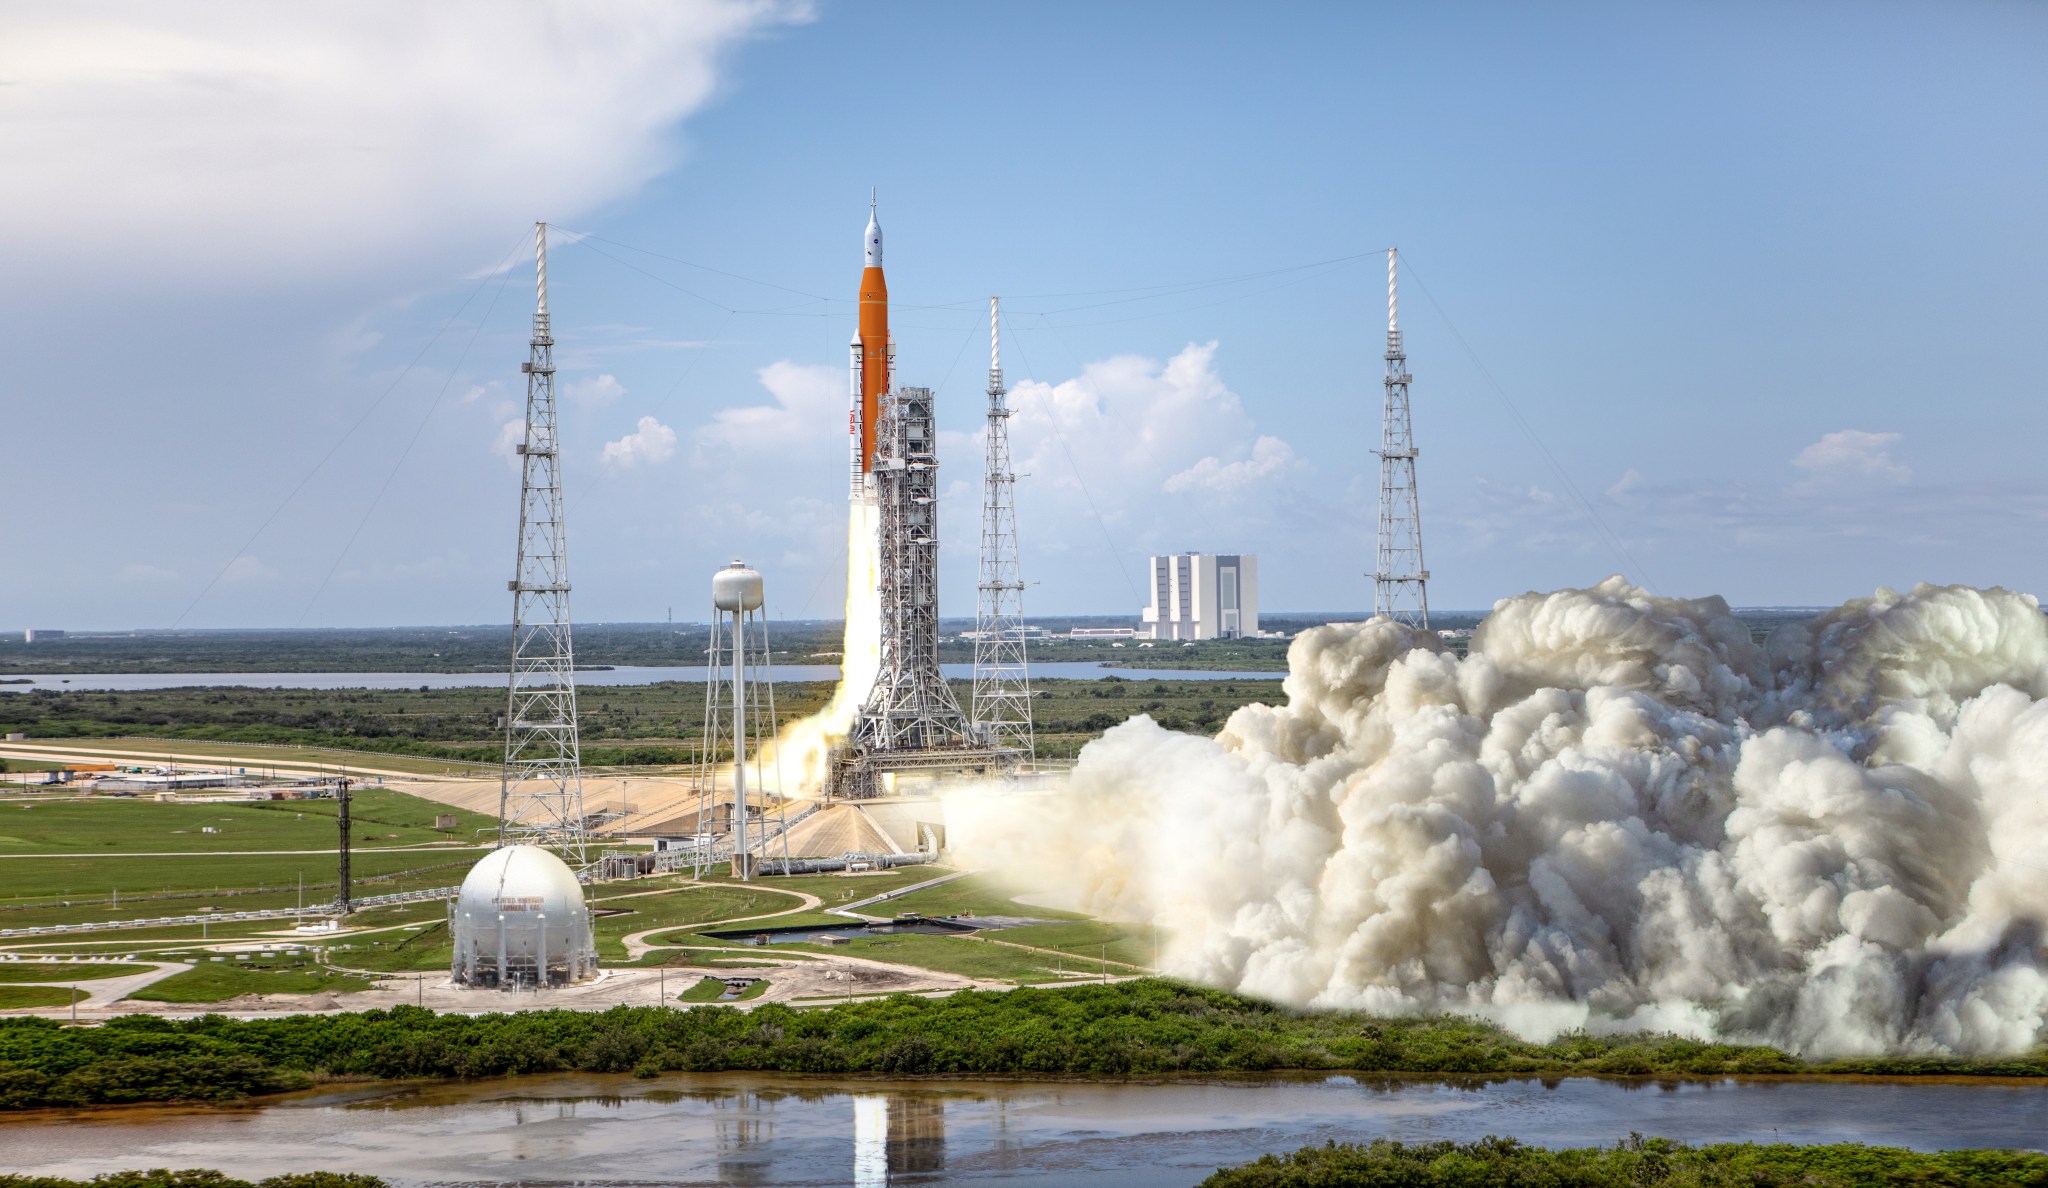 This artist rendering shows NASA’s Space Launch System (SLS) rocket and Orion spacecraft lifting off from Kennedy Space Center’s Launch Pad 39B for the Artemis I mission.